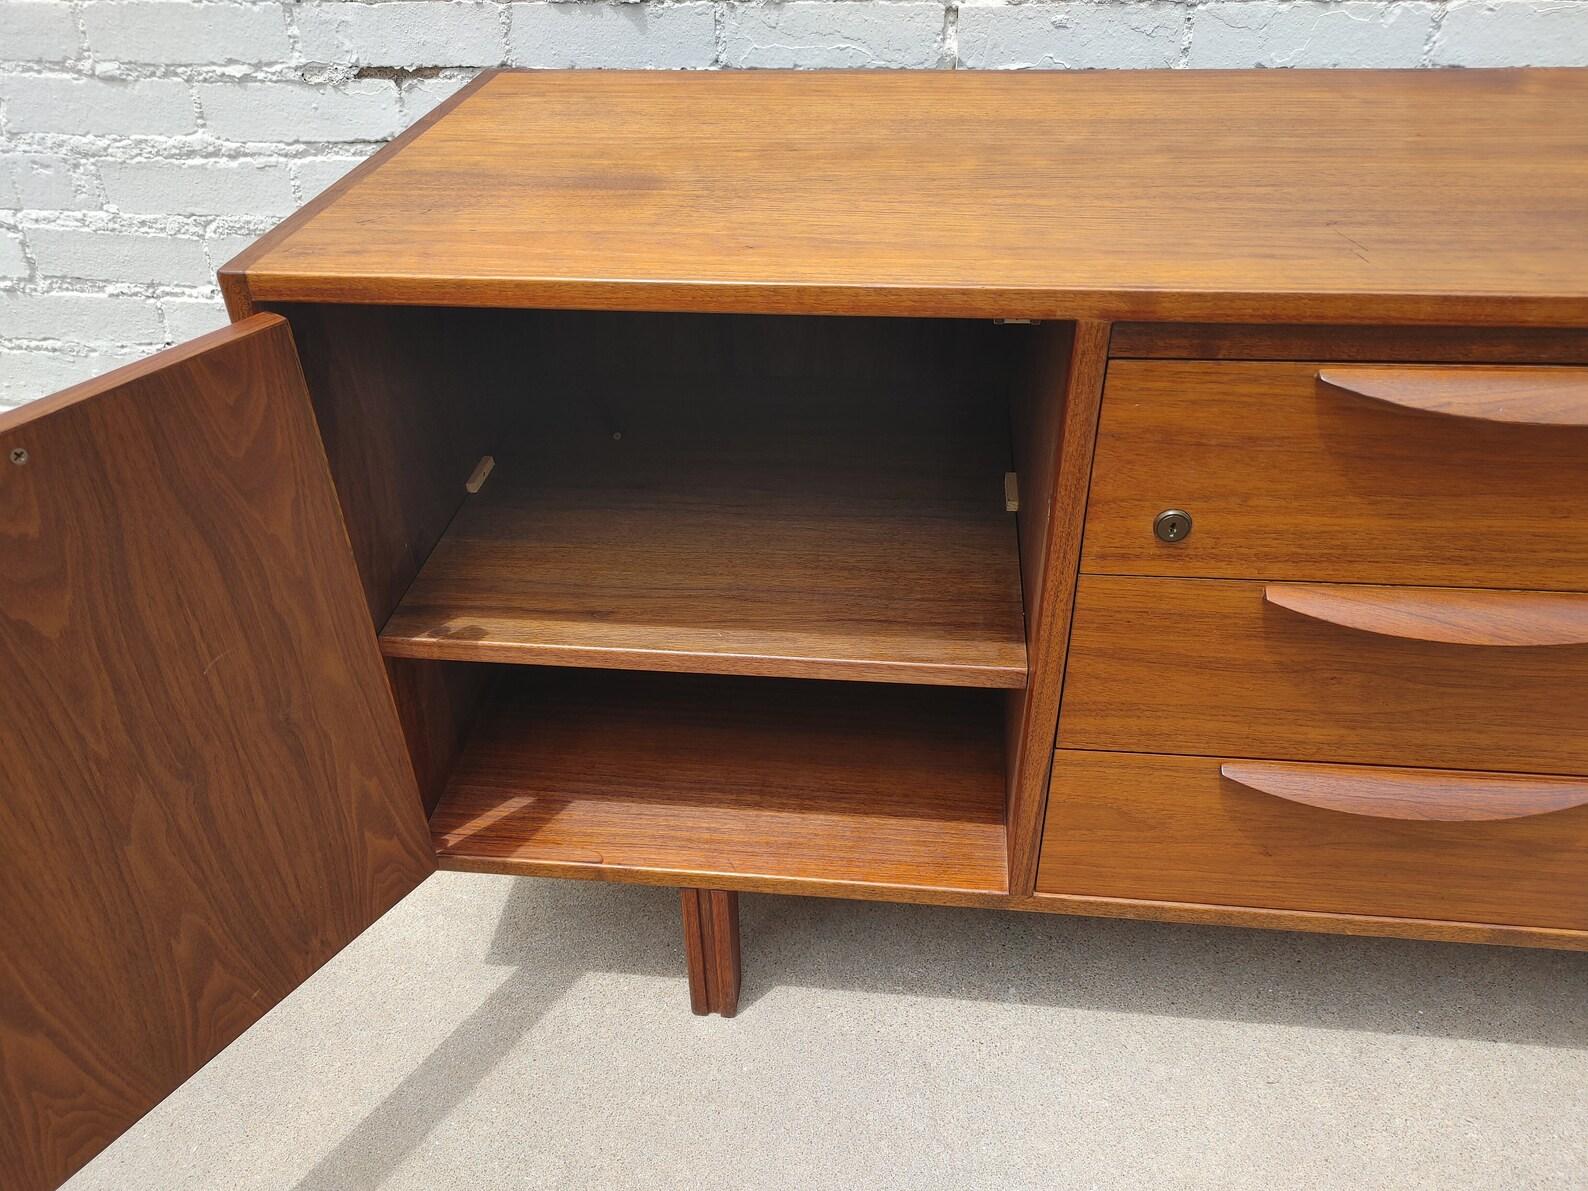 Mid Century Modern Jens Risom Walnut Credenza

Above average vintage condition and structurally sound. Has some expected slight finish wear and scratching. Top has been refinished and does not have original factory finish. Finished back. I do not